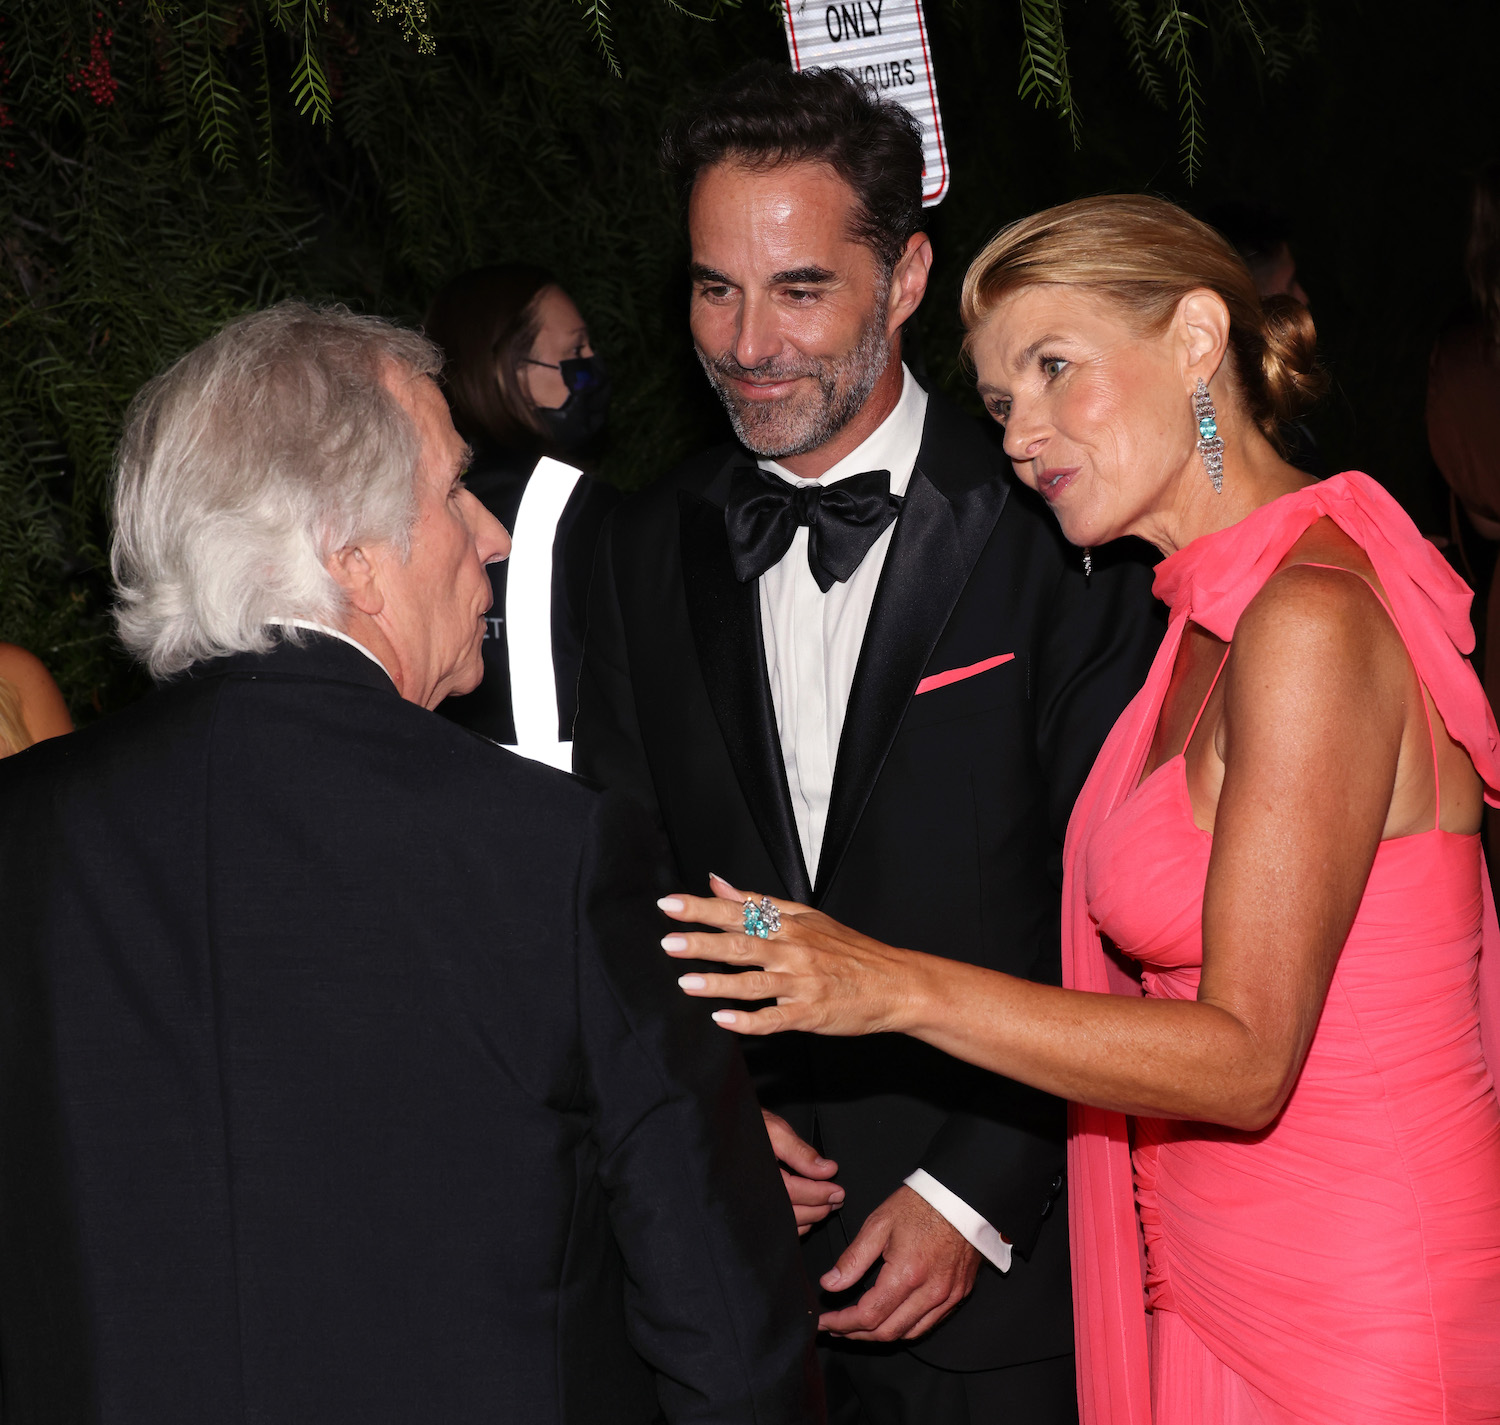 Henry Winkler, David Windsor and Connie Britton attend the HBO Emmy's Party 2022